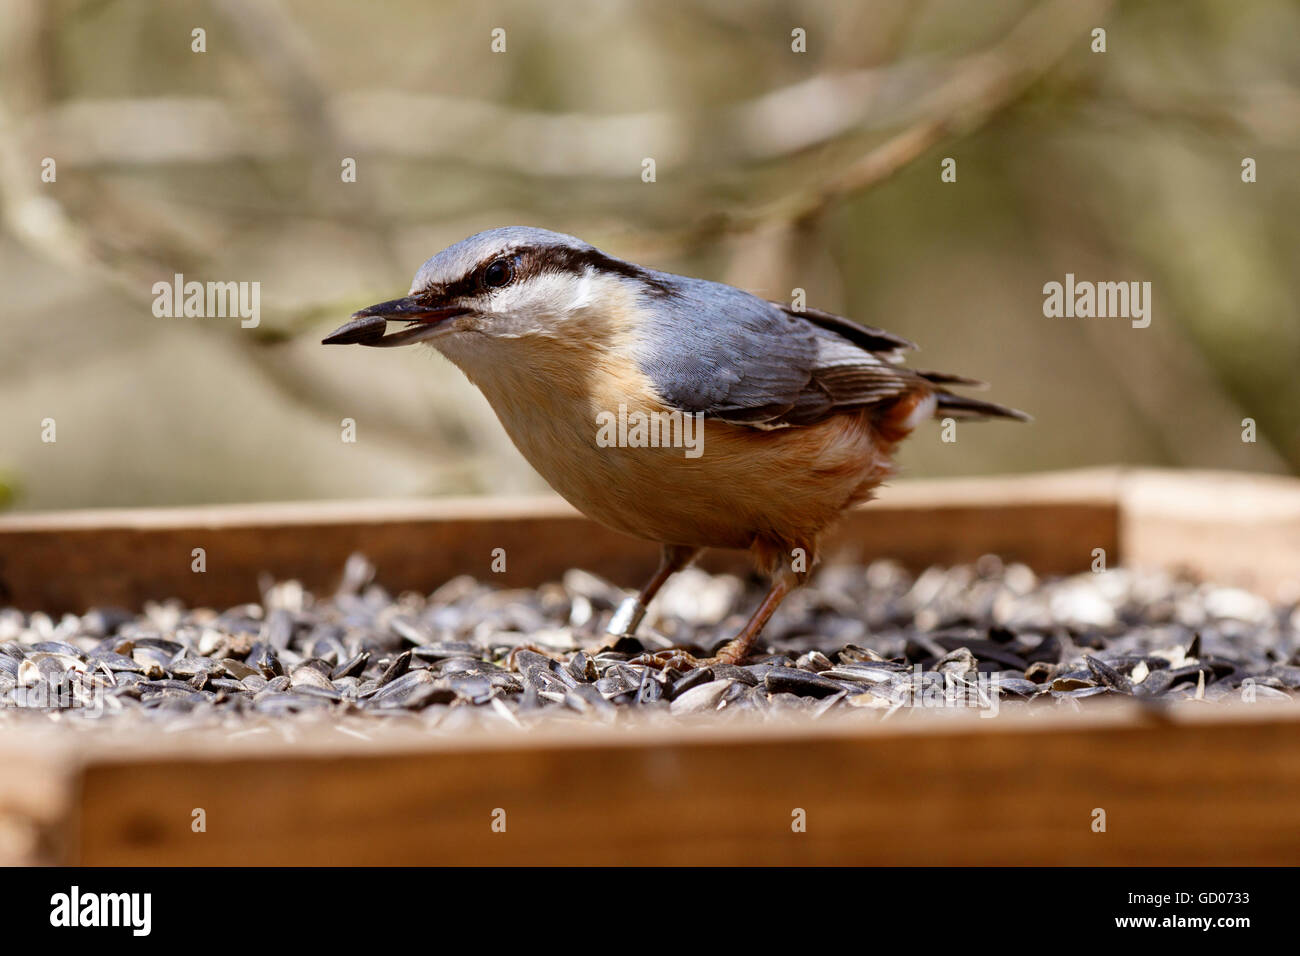 Eurasian Nuthatch Sitta europea adult collecting Sunflower seed from seed tray feeder Stock Photo